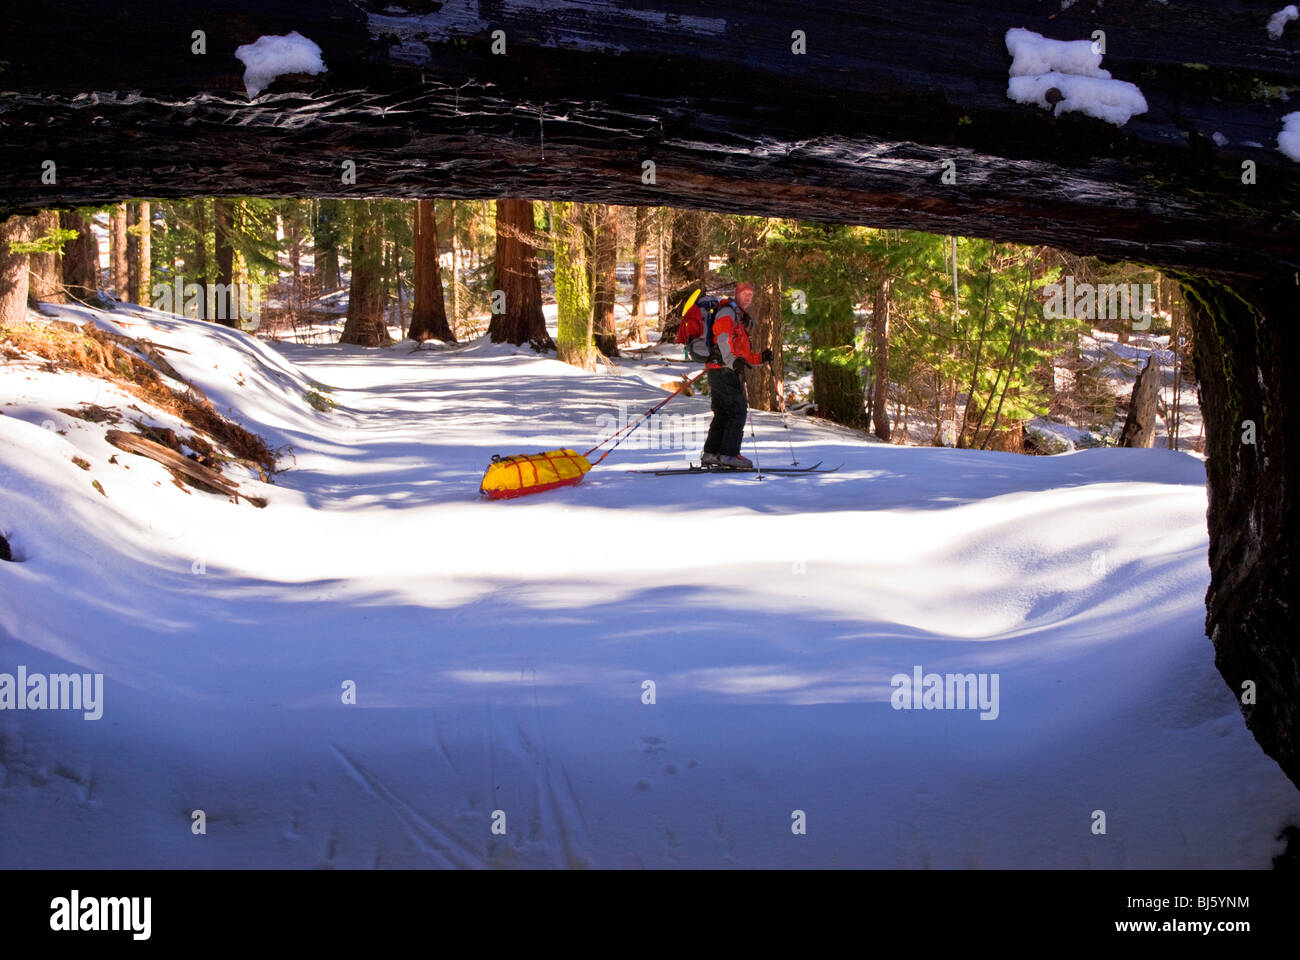 Backcountry skier at the Tunnel Log, Giant Forest, Sequoia National Park, California Stock Photo